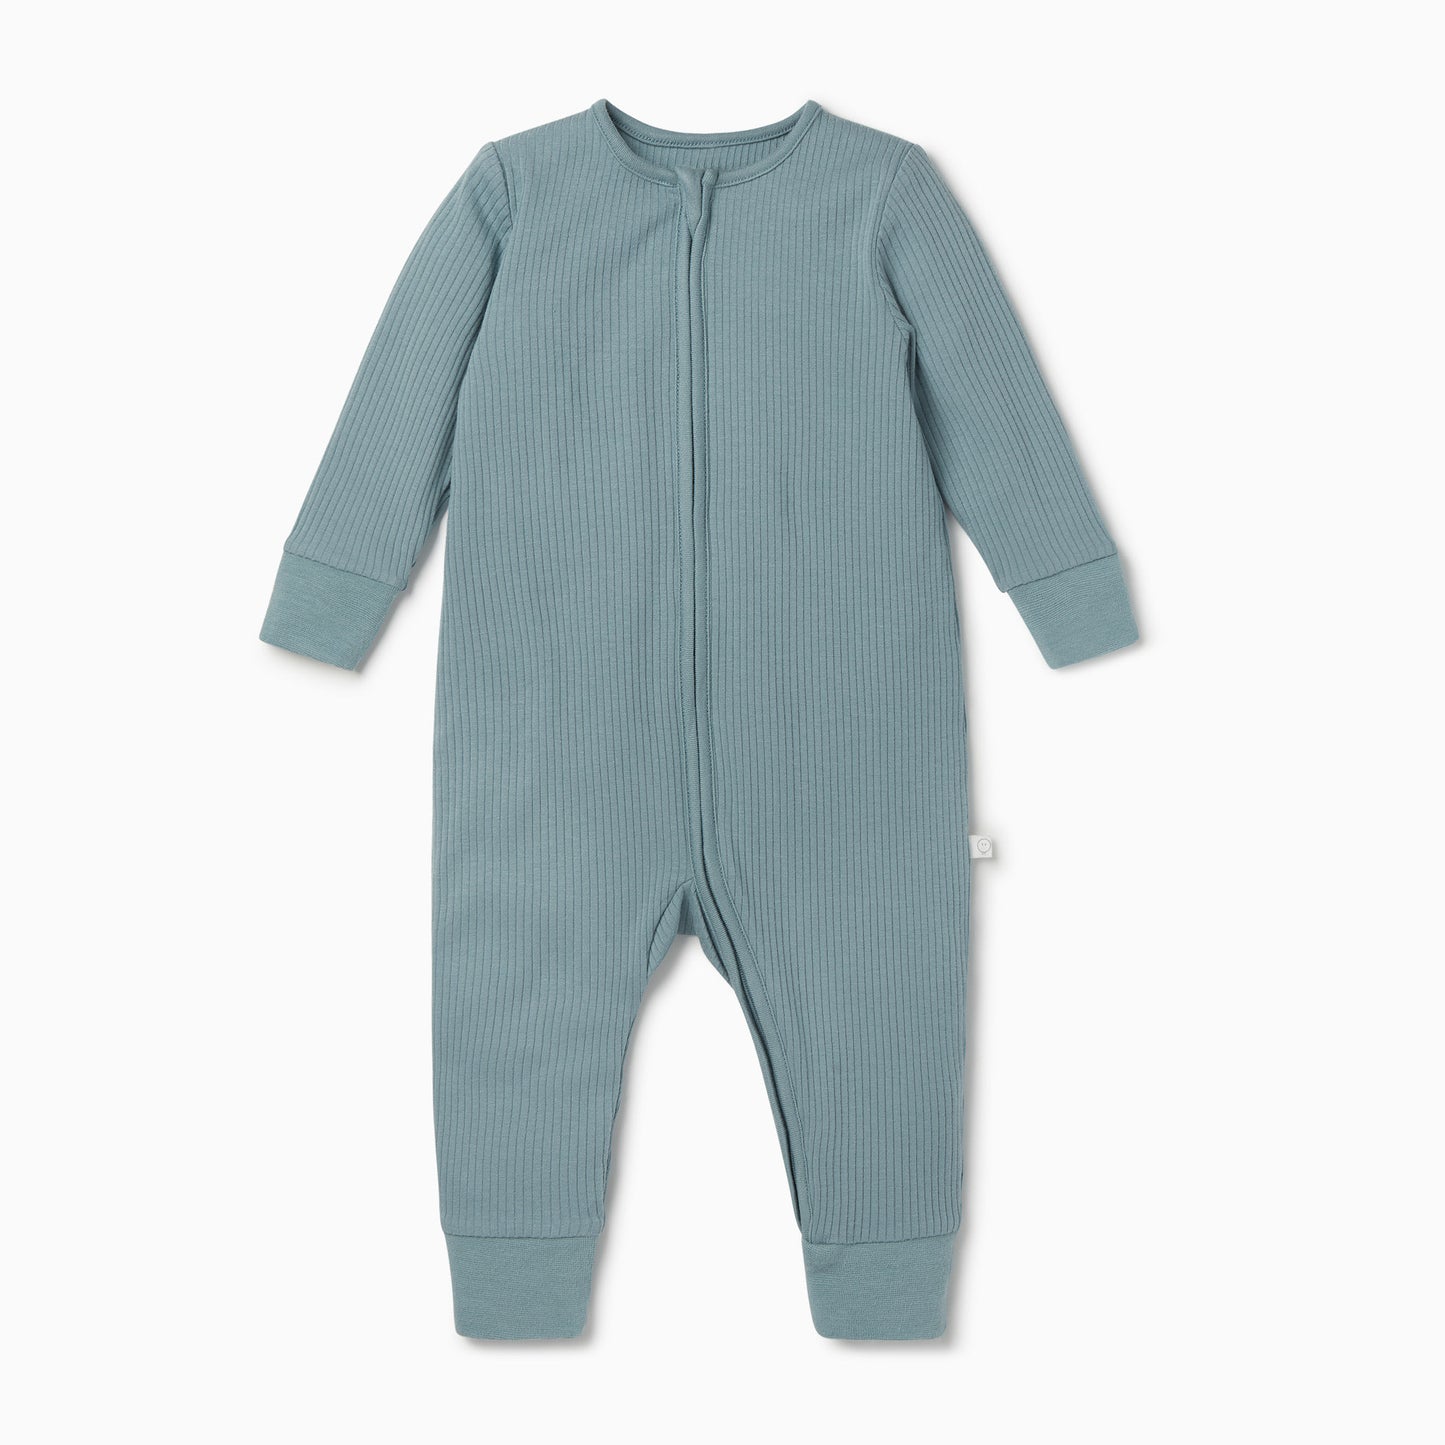 Sky ribbed zip up sleepsuit with no feet